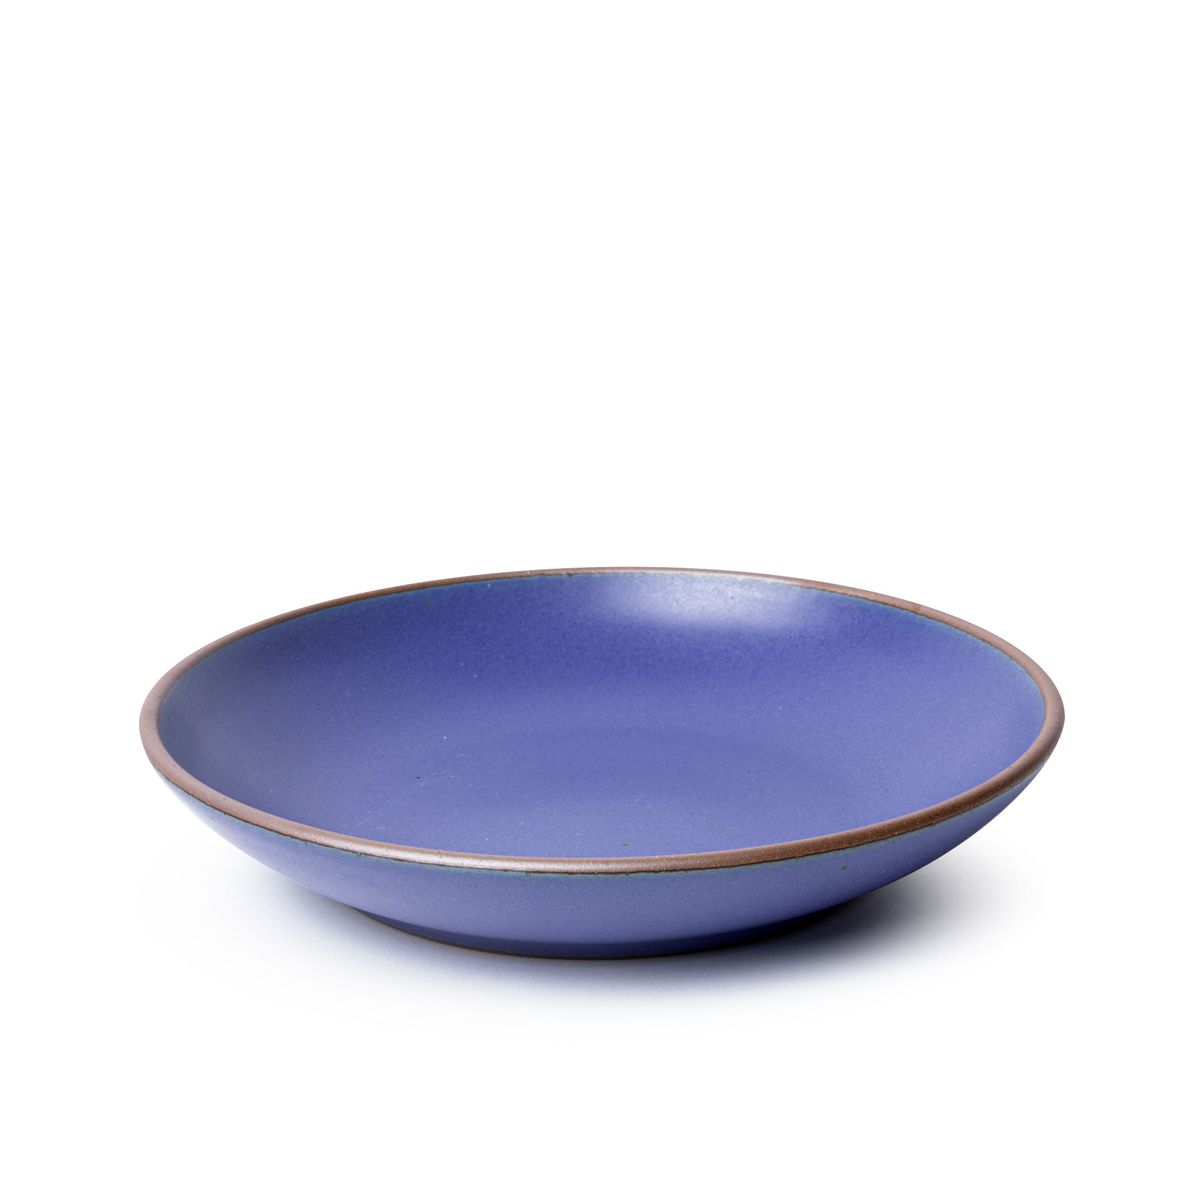 A large ceramic plate with a curved bowl edge in a true cool blue color featuring iron speckles and an unglazed rim.